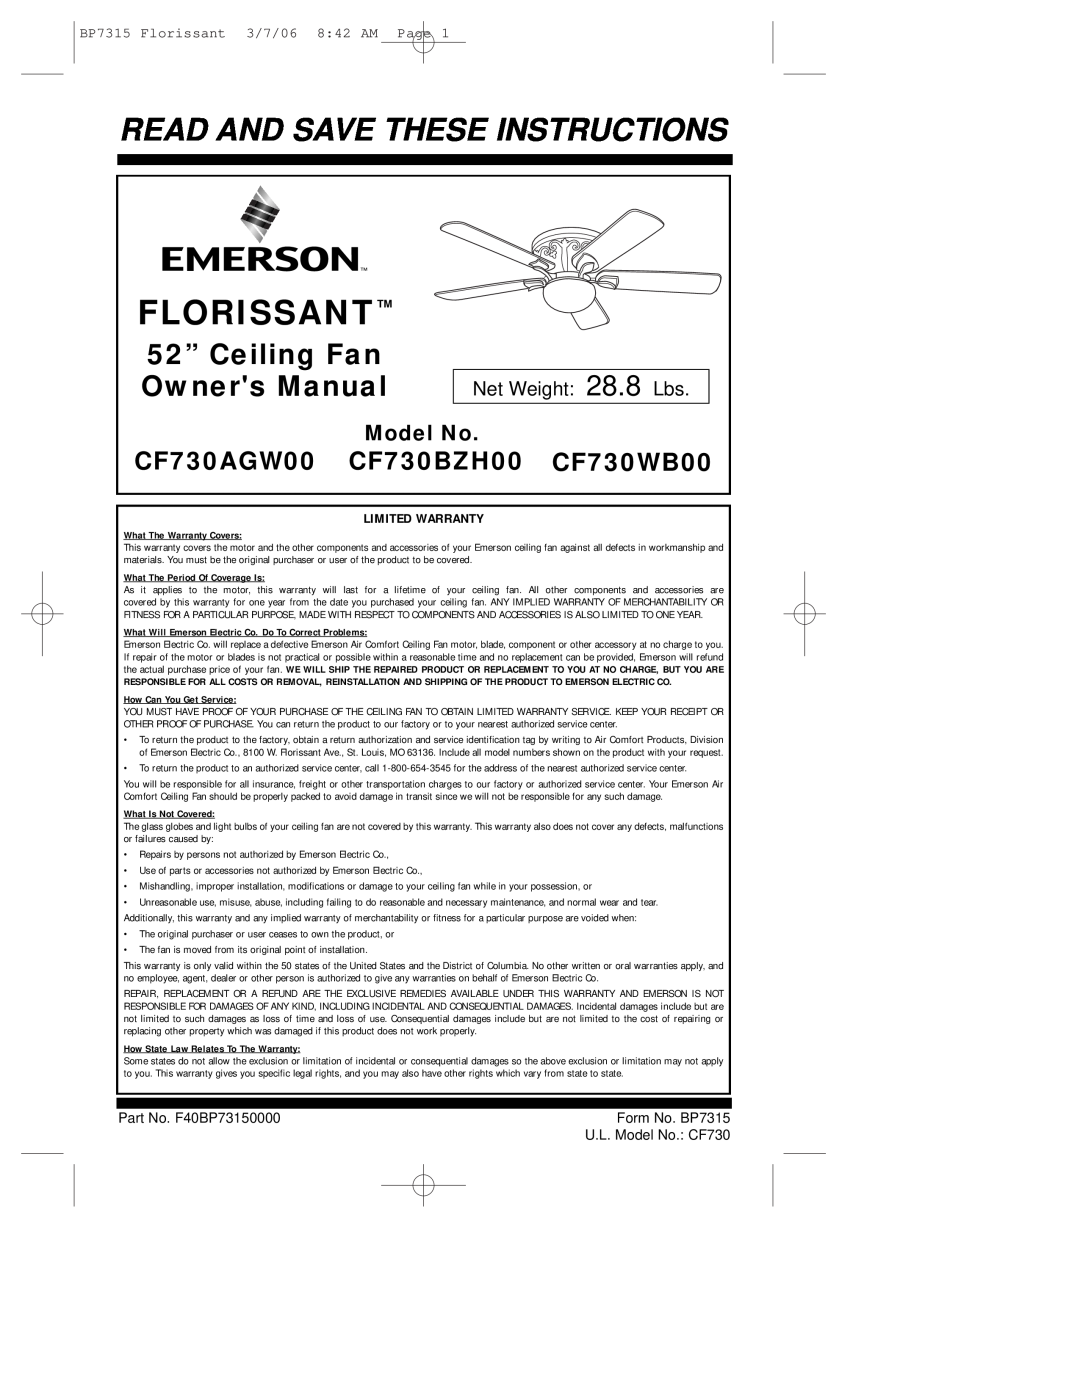 Emerson warranty CF730AGW00 CF730BZH00 CF730WB00, Model No, Florissant, Read And Save These Instructions 